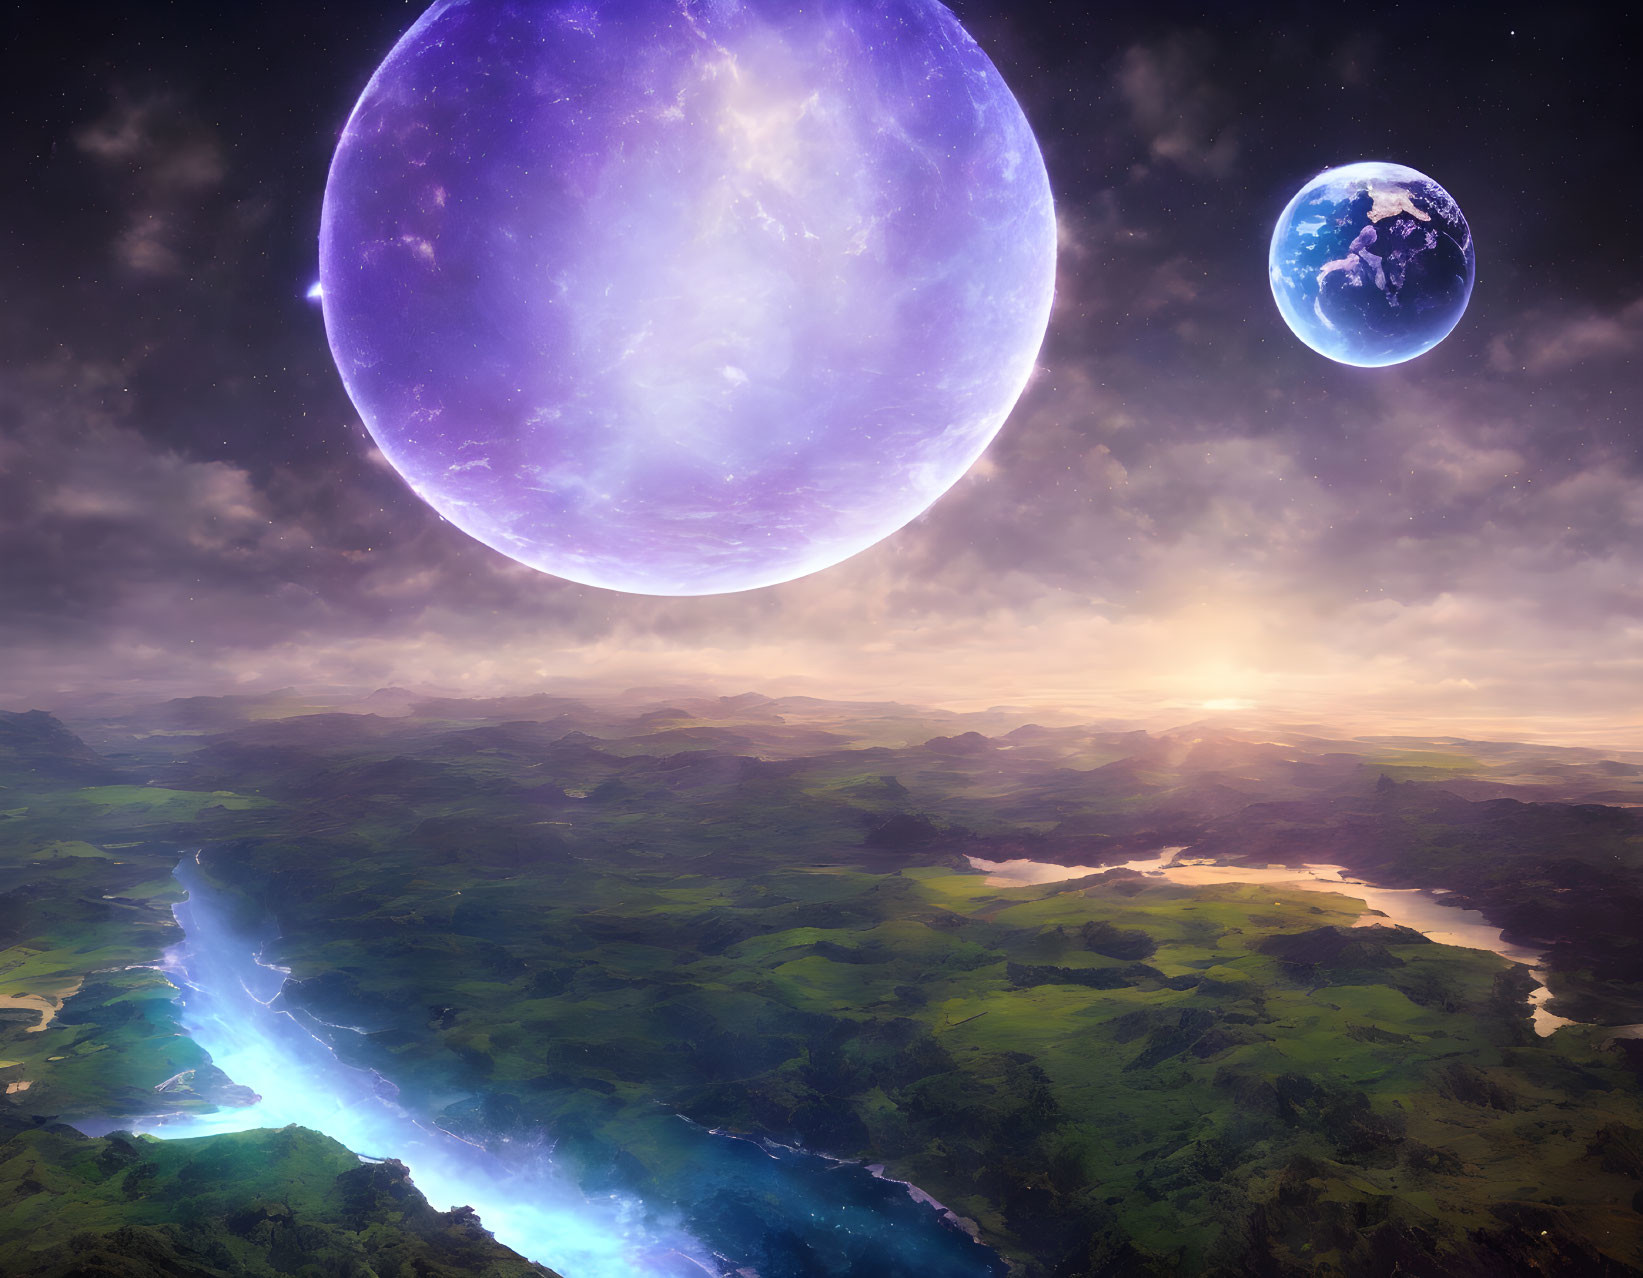 Majestic twilight scene with purple planet and Earth-like world in starry sky